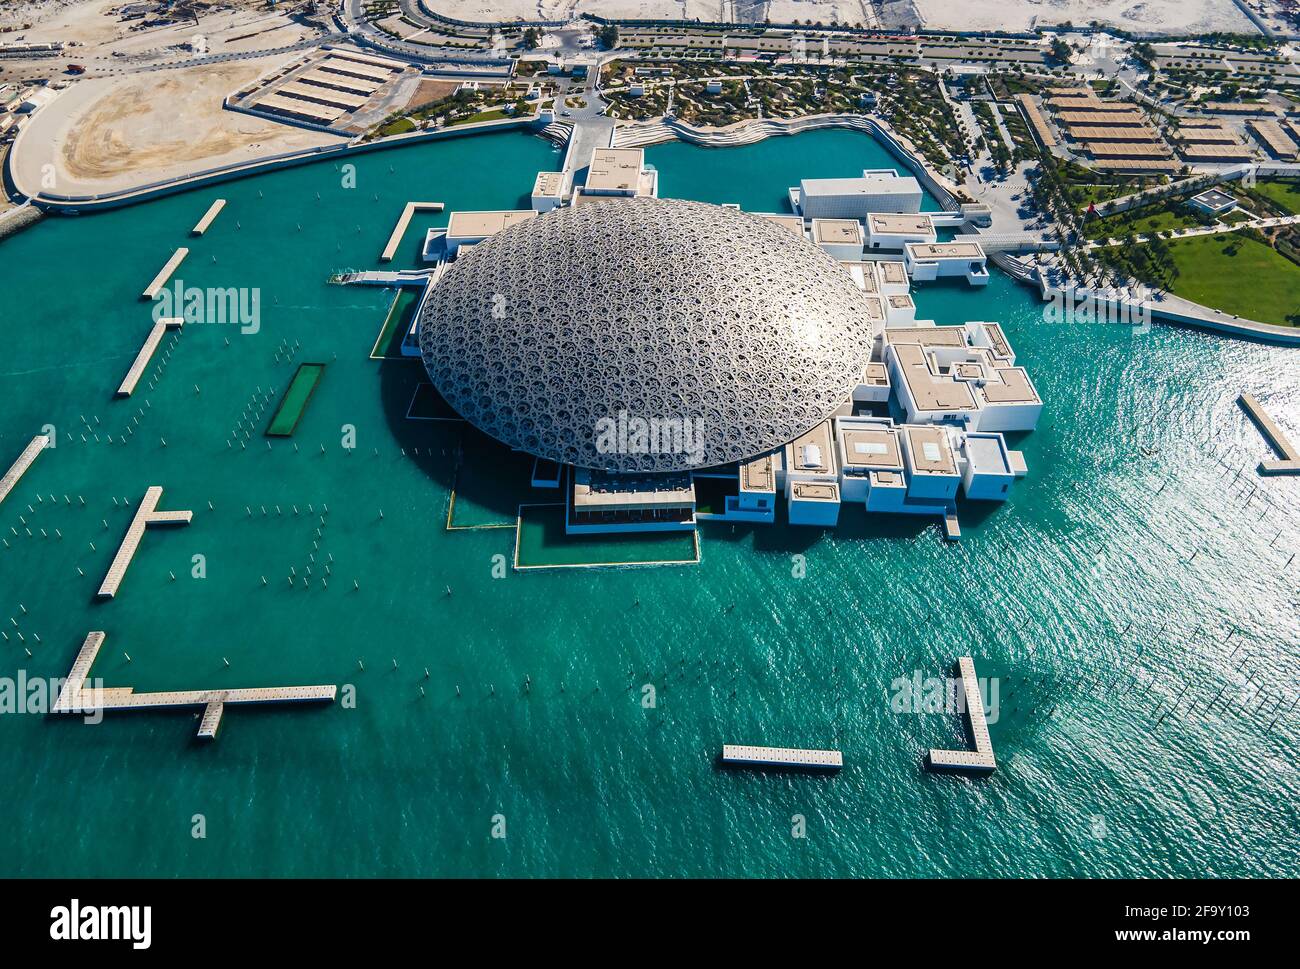 Abu Dhabi, United Arab Emirates - April 6, 2021: Louvre museum in Abu Dhabi emirate of the United Arab Emirates at sunrise aerial drone view of the bu Stock Photo